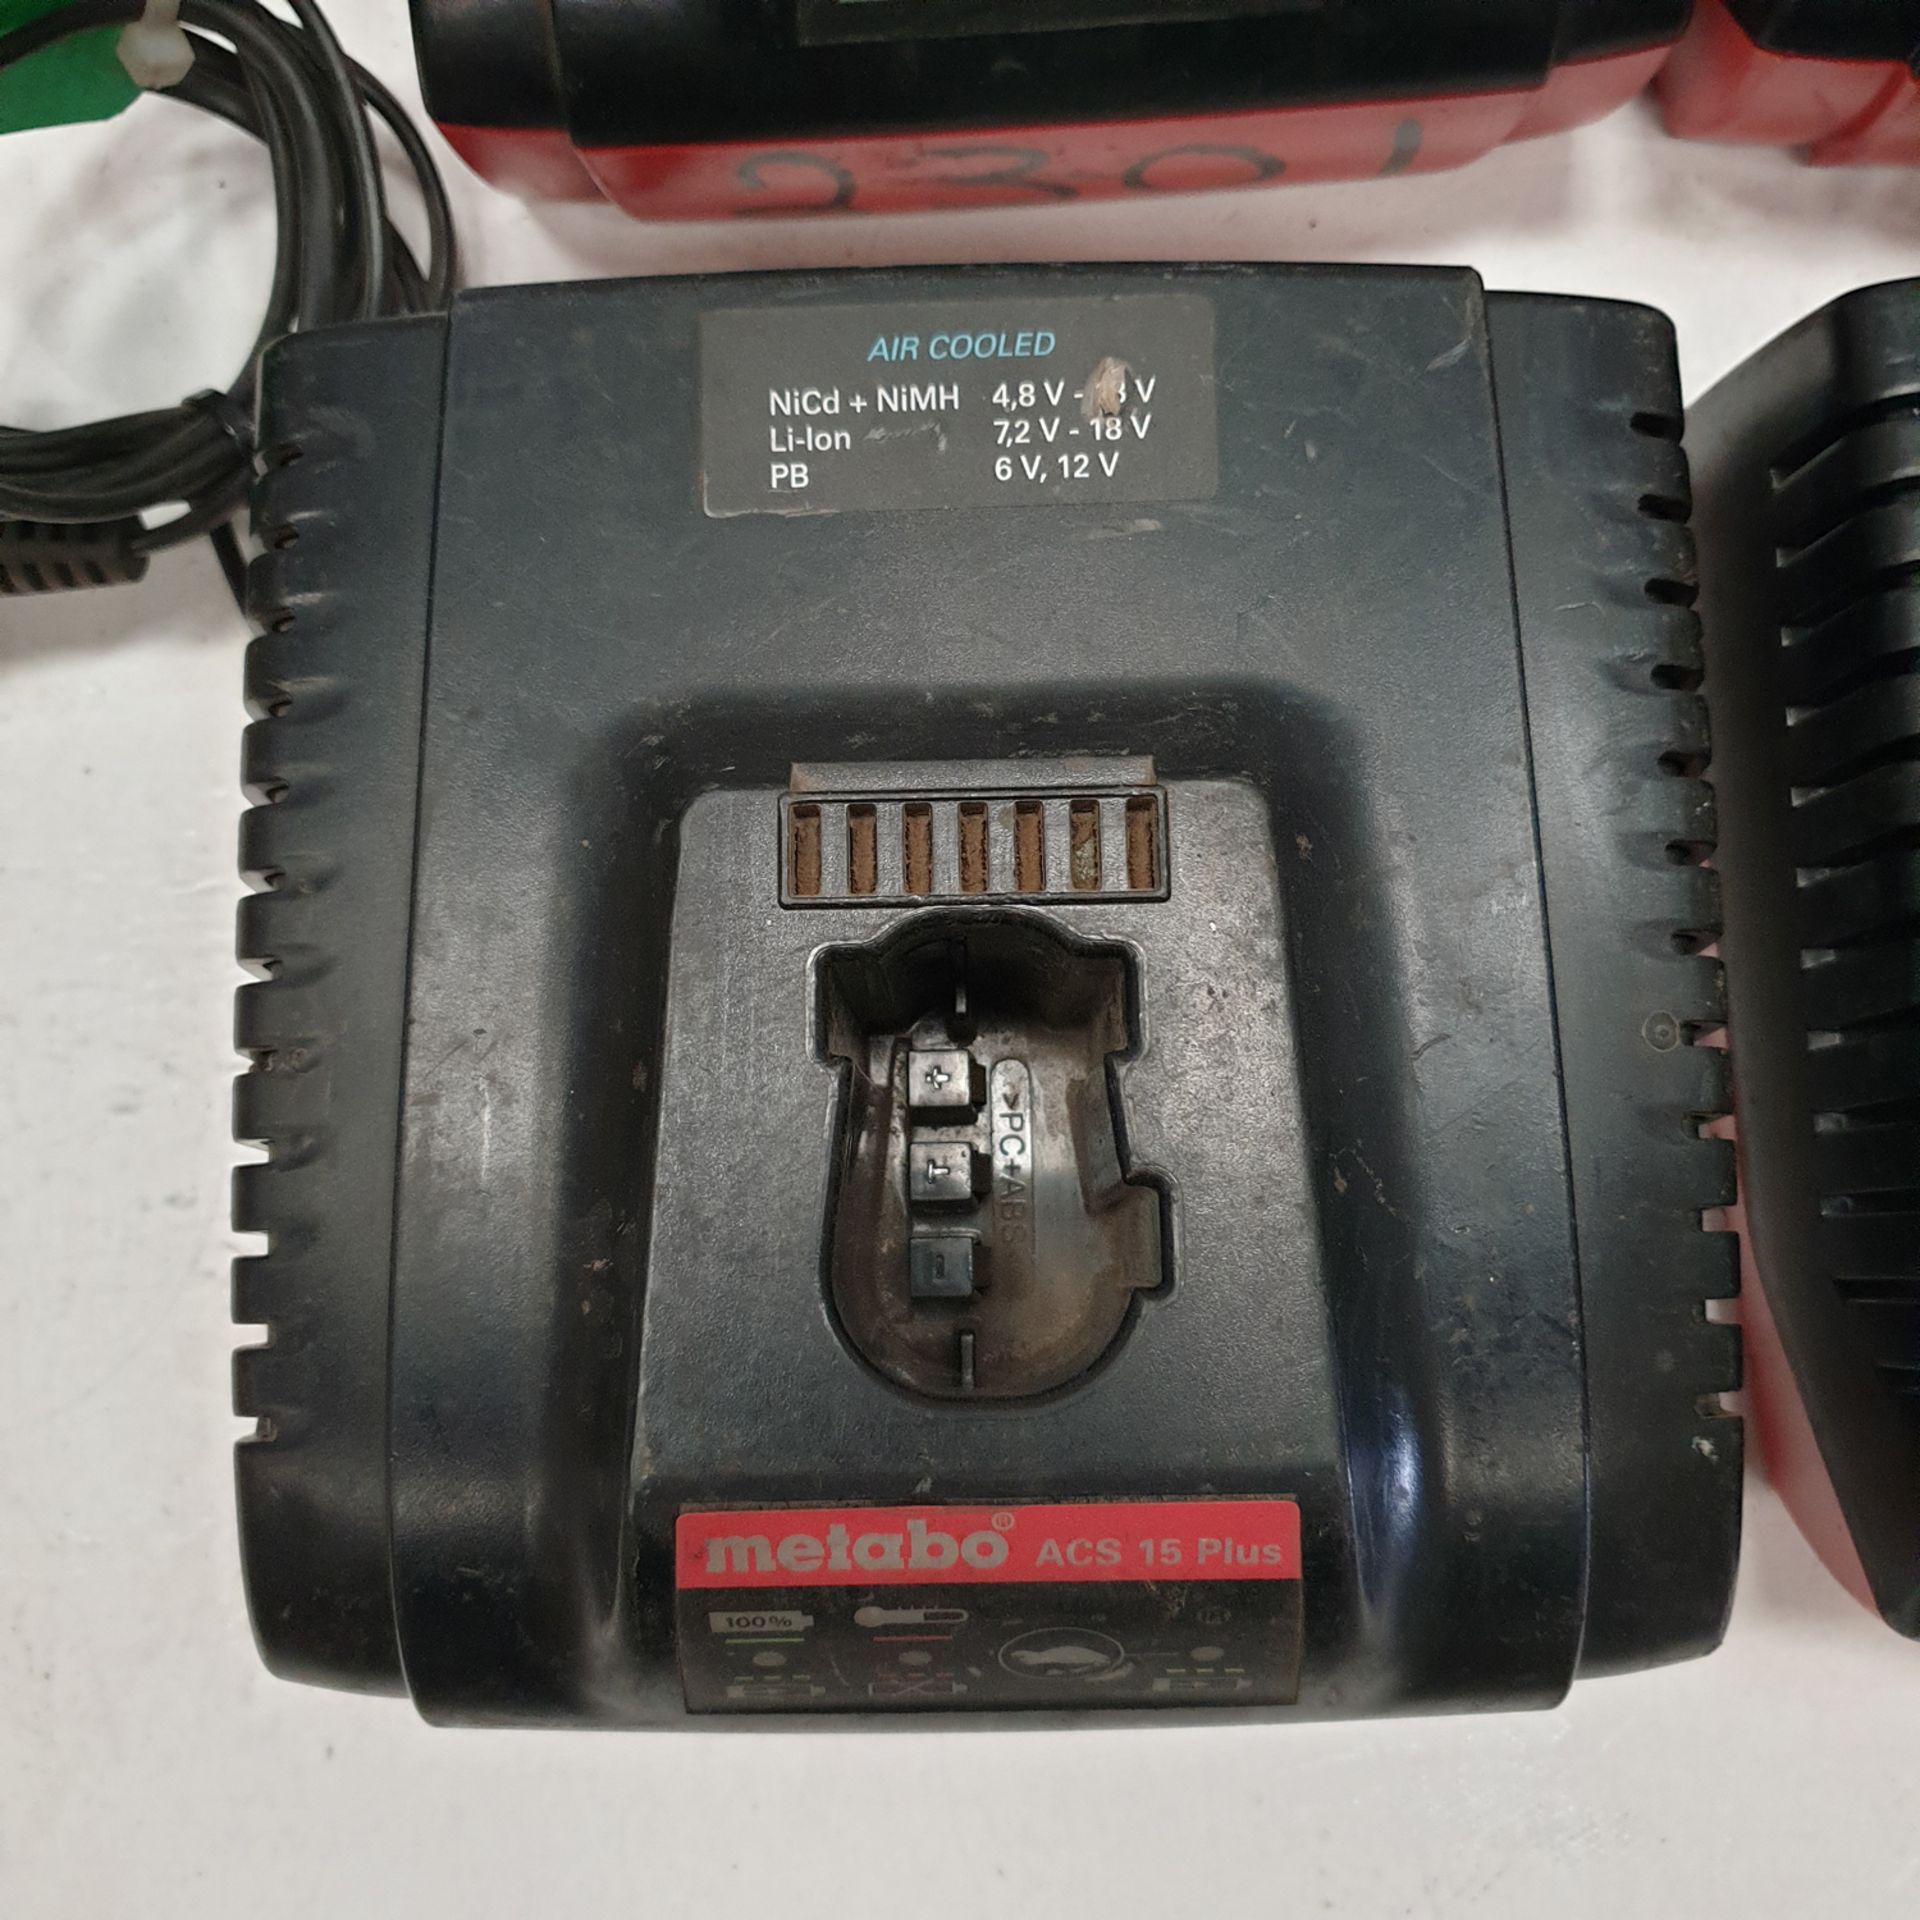 4 x Metabo ACS 15 Plus Battery Chargers. 220-240 Volt. - Image 2 of 3